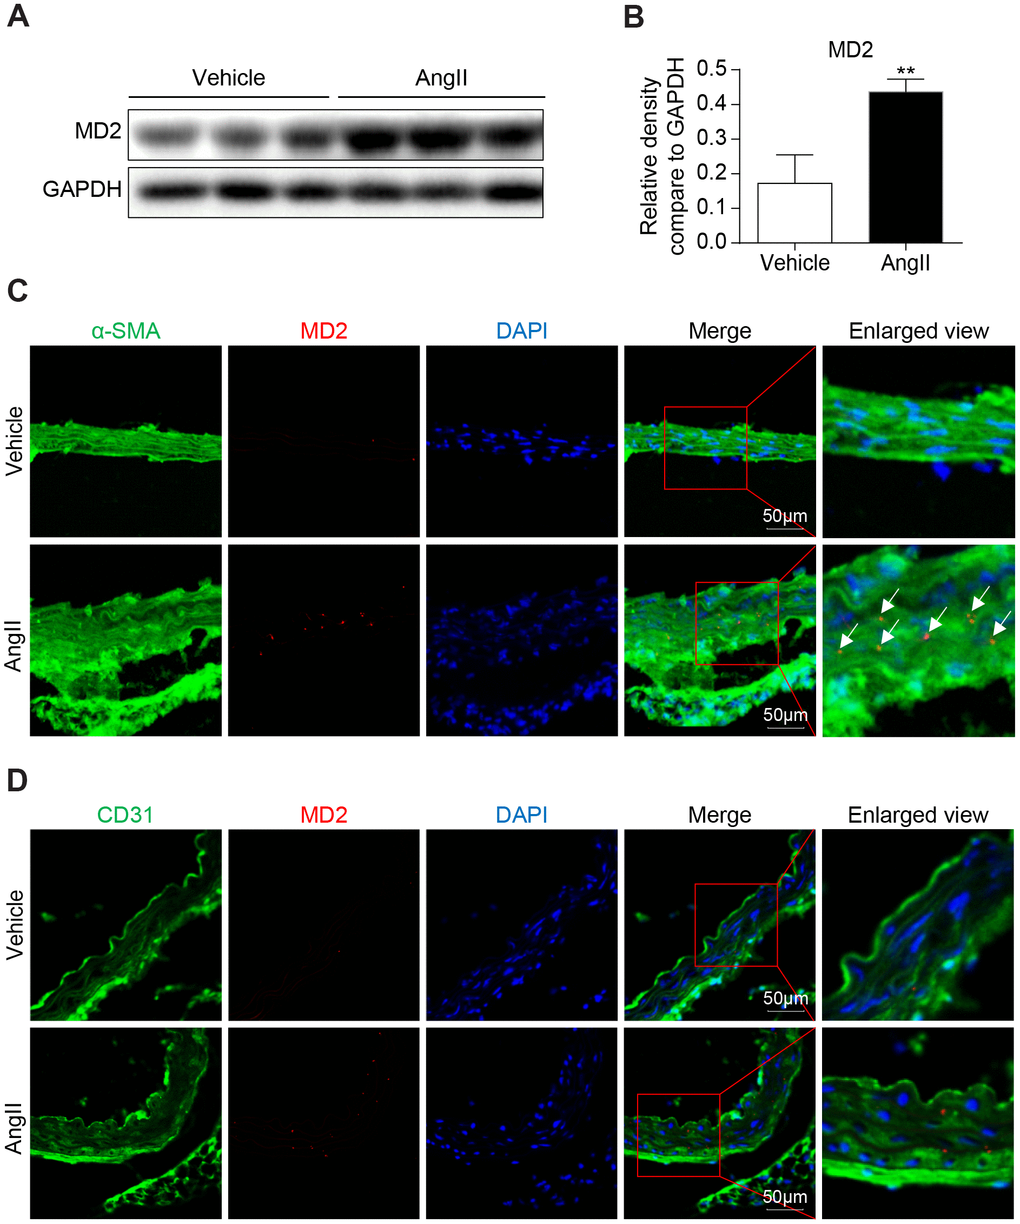 MD2 is increased in aortas of Ang II induced mice. (A) MD2 protein levels in aortas of mice induced by Ang II were detected by western blotting. Panel (B) showed densitometric quantification (n = 10; **PC) Representative immunofluorescence staining of MD2 (red) and VSMCs marker α-SMA (green). Tissues were counterstained with DAPI (blue). Yellow arrows indicate co-location of MD2 and α-SMA stanning (scale bar = 50 μm). (D) Representative immunofluorescence staining of MD2 (red) and endothelial cells marker CD31 (green). Tissues were counterstained with DAPI (blue). Yellow arrows indicate co-location of MD2 and CD31 stanning (scale bar = 50 μm).